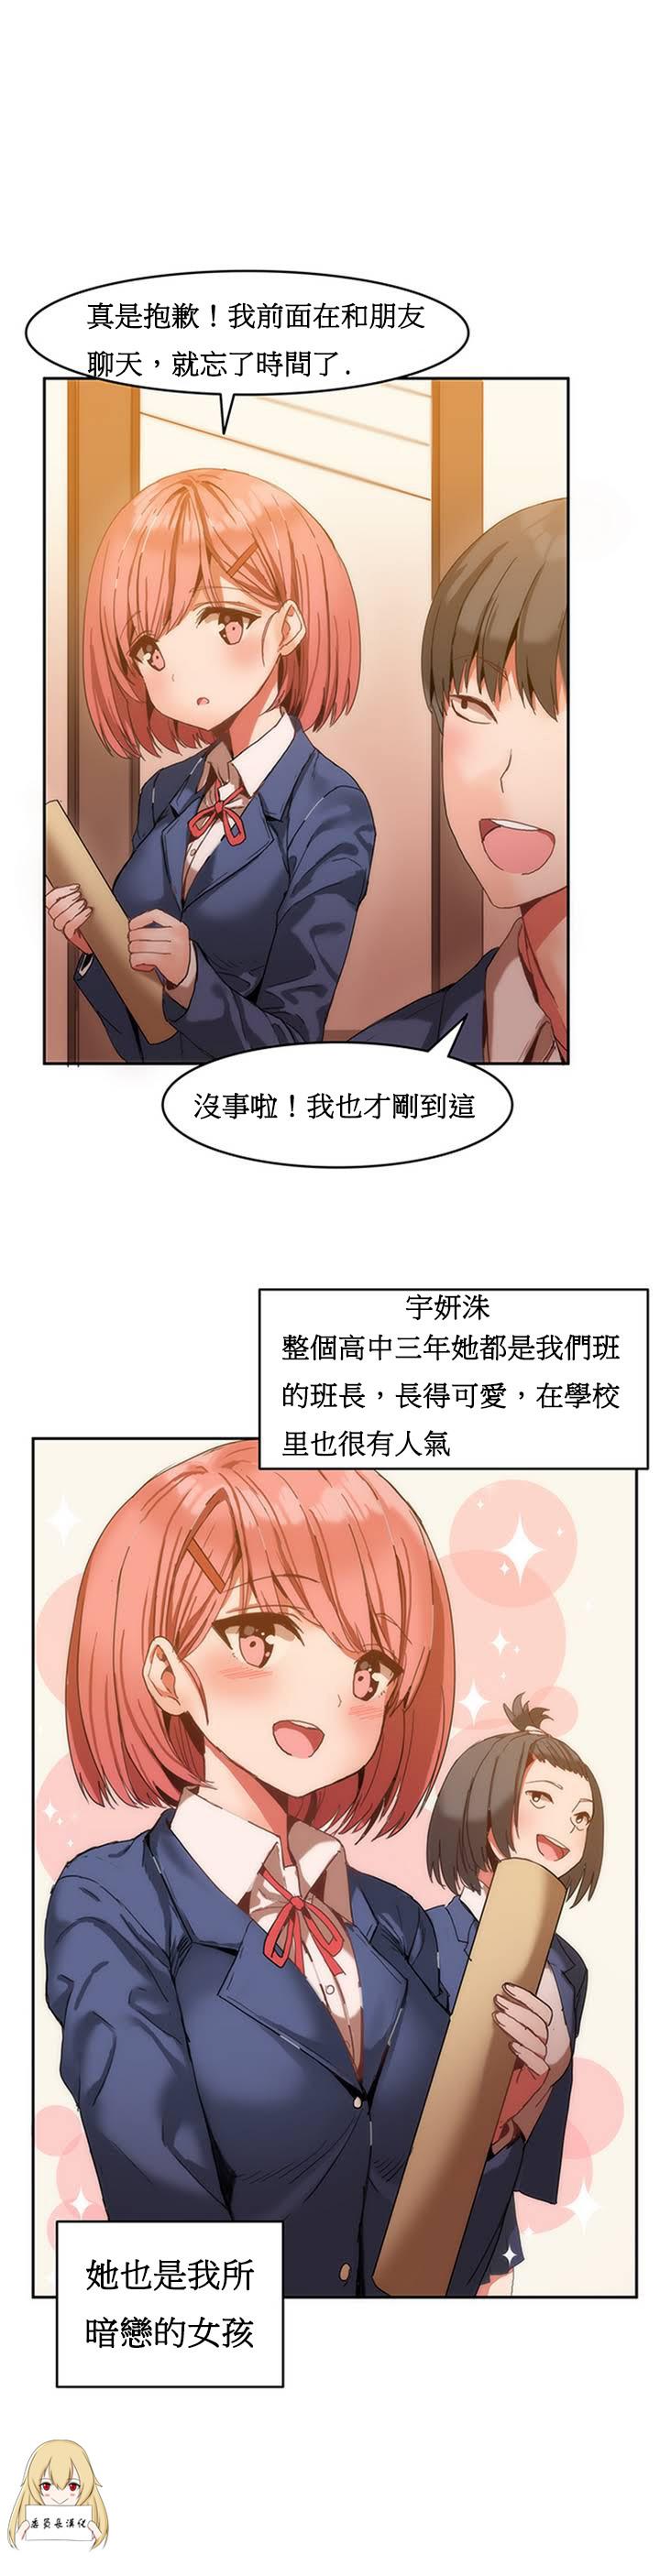 Hot Naked Women Hahri's Lumpy Boardhouse Ch. 1~18【委員長個人漢化】（持續更新） Small - Page 5